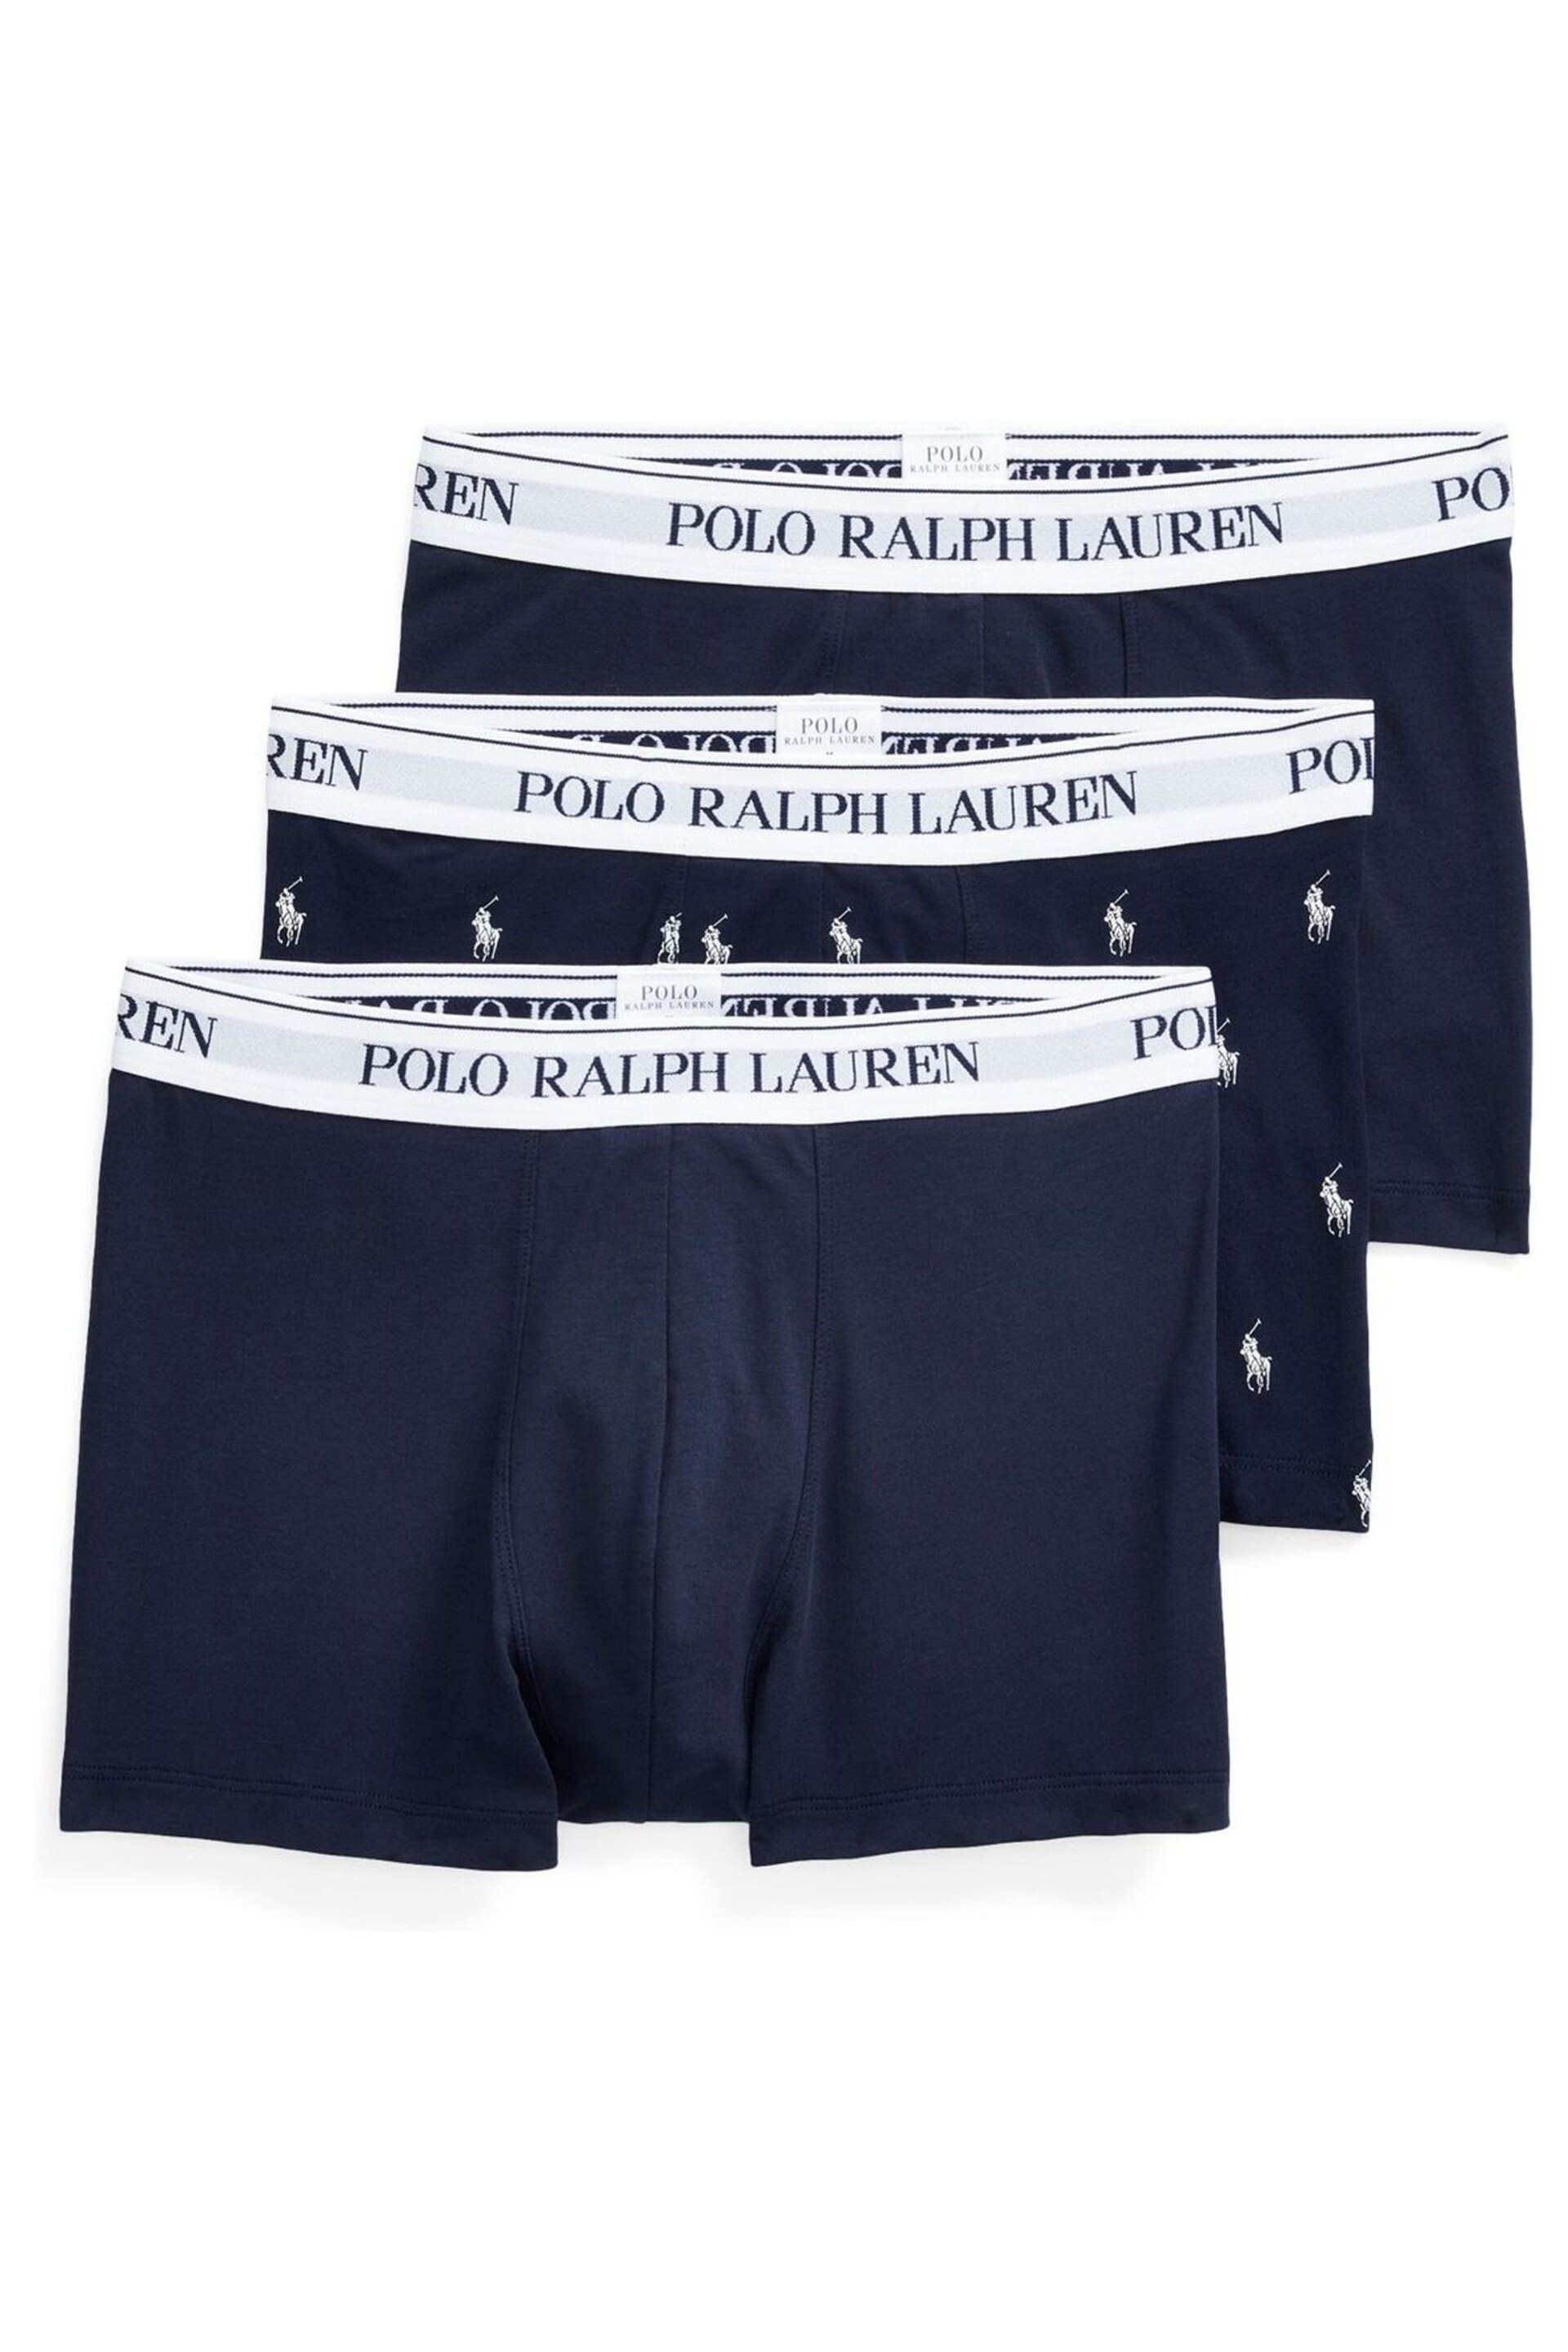 Polo Ralph Lauren Classic Stretch-Cotton Short 3-Pack - Image 1 of 6